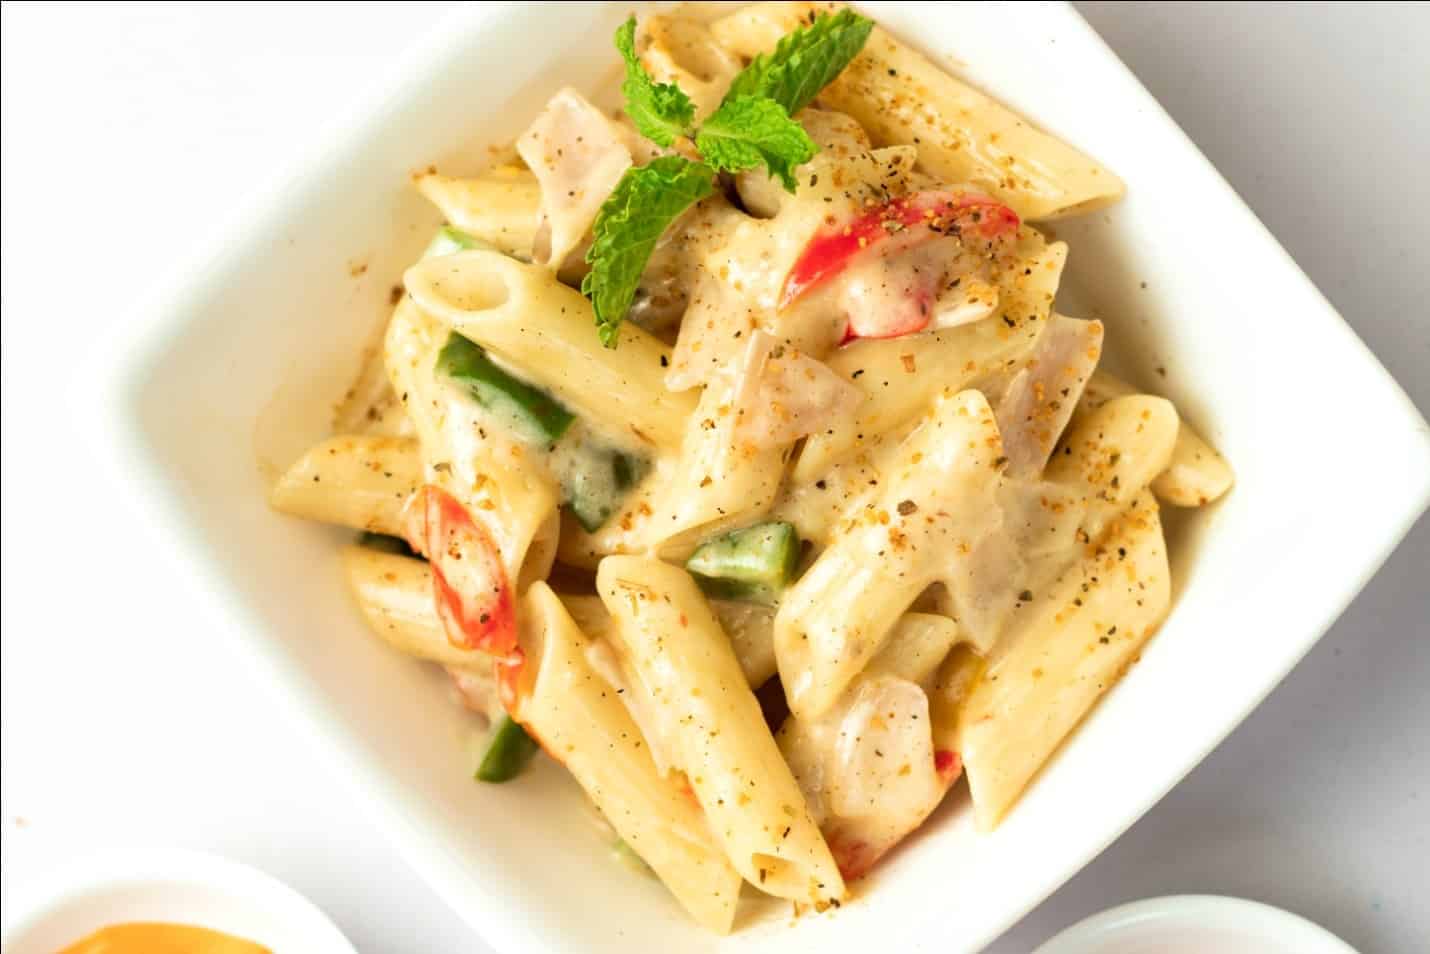 Penne Pasta in a Bowl